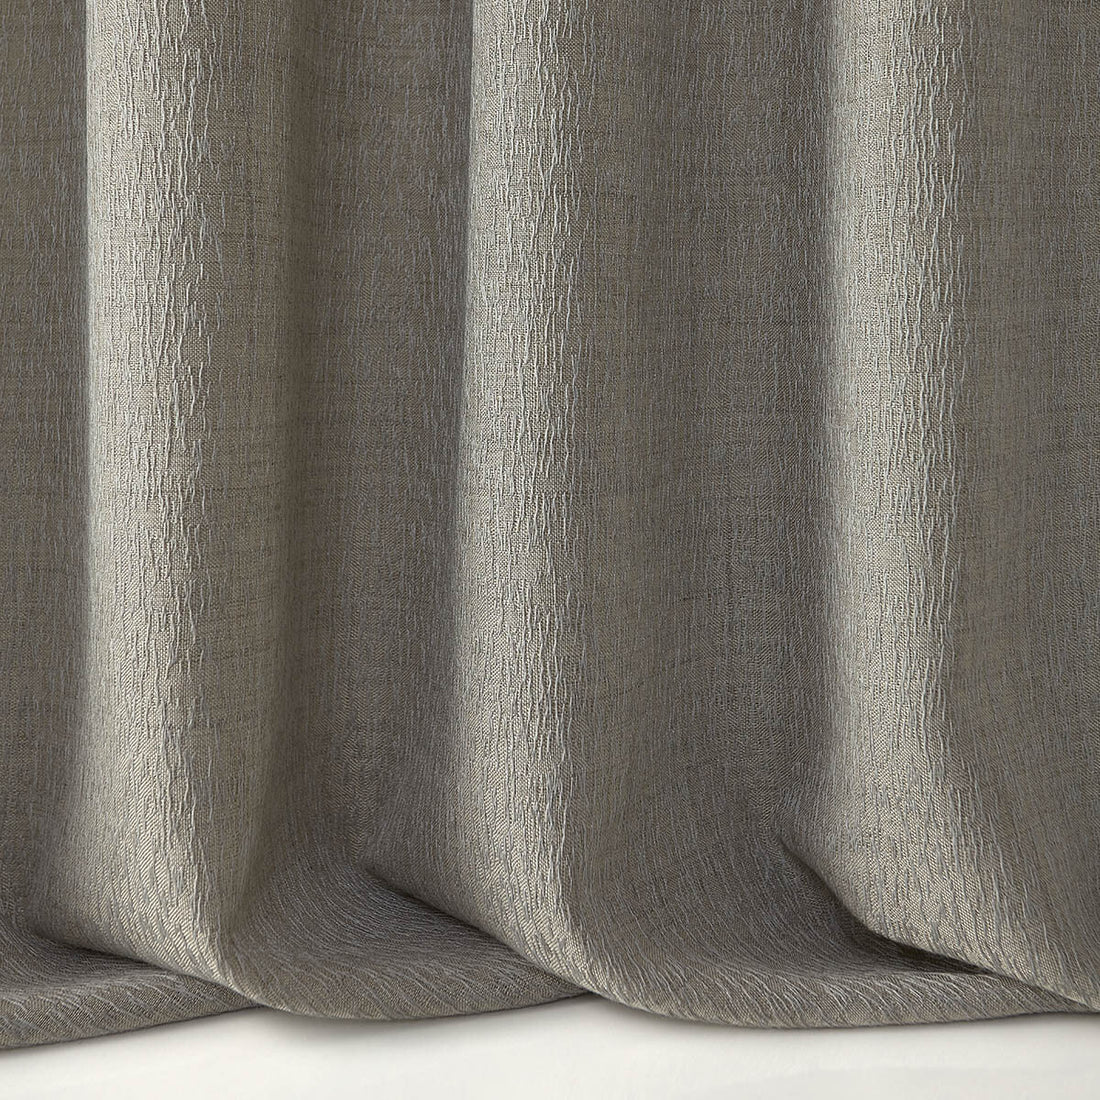 Testa fabric in 9 color - pattern LZ-30343.09.0 - by Kravet Design in the Lizzo collection